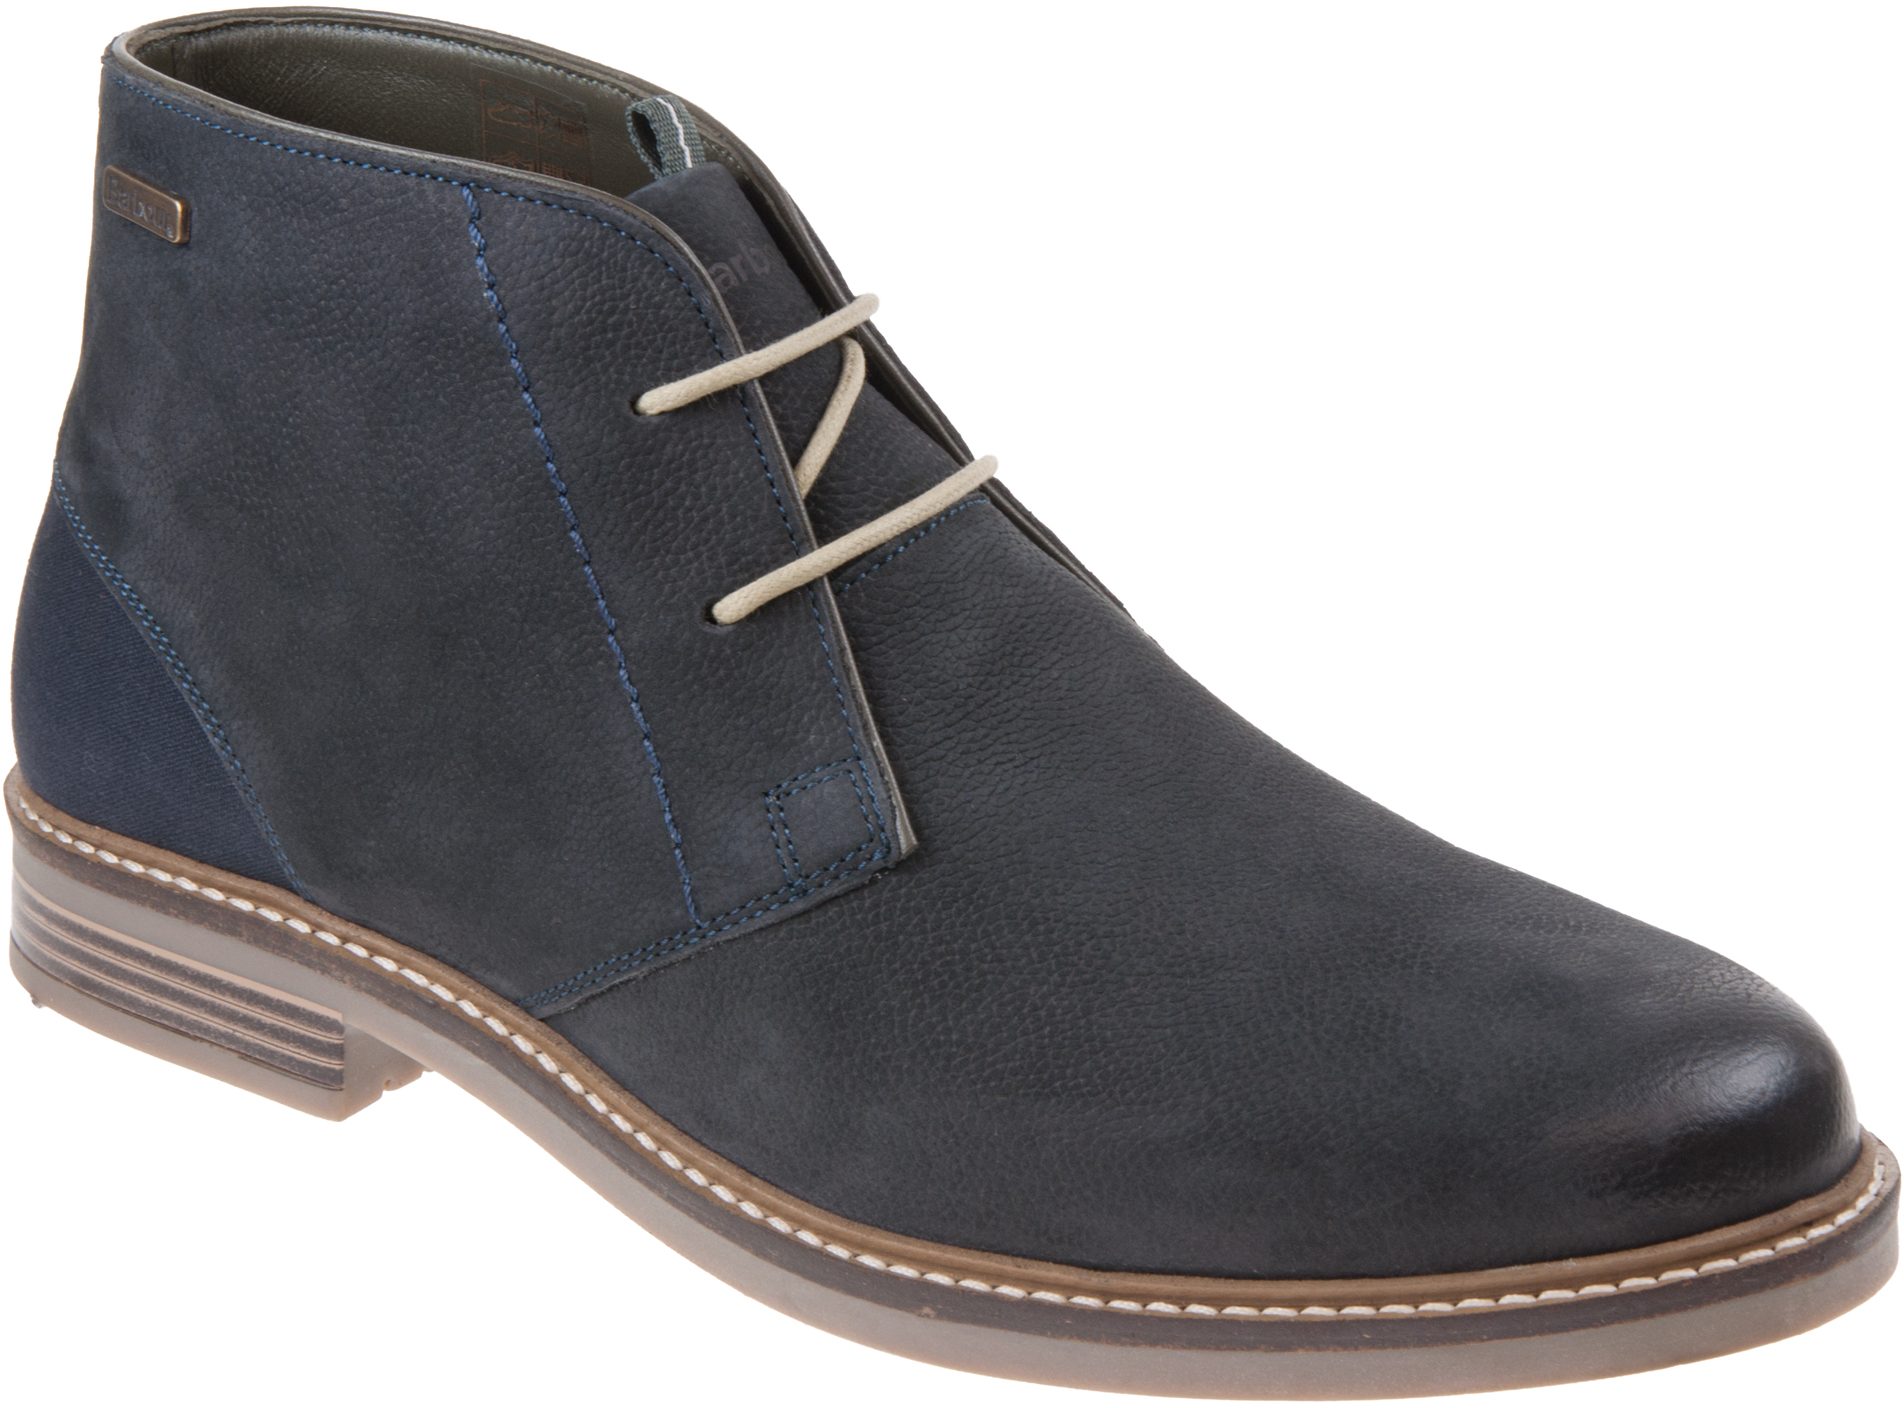 Barbour Readhead Navy MFO0138NY12 - Casual Boots - Humphries Shoes